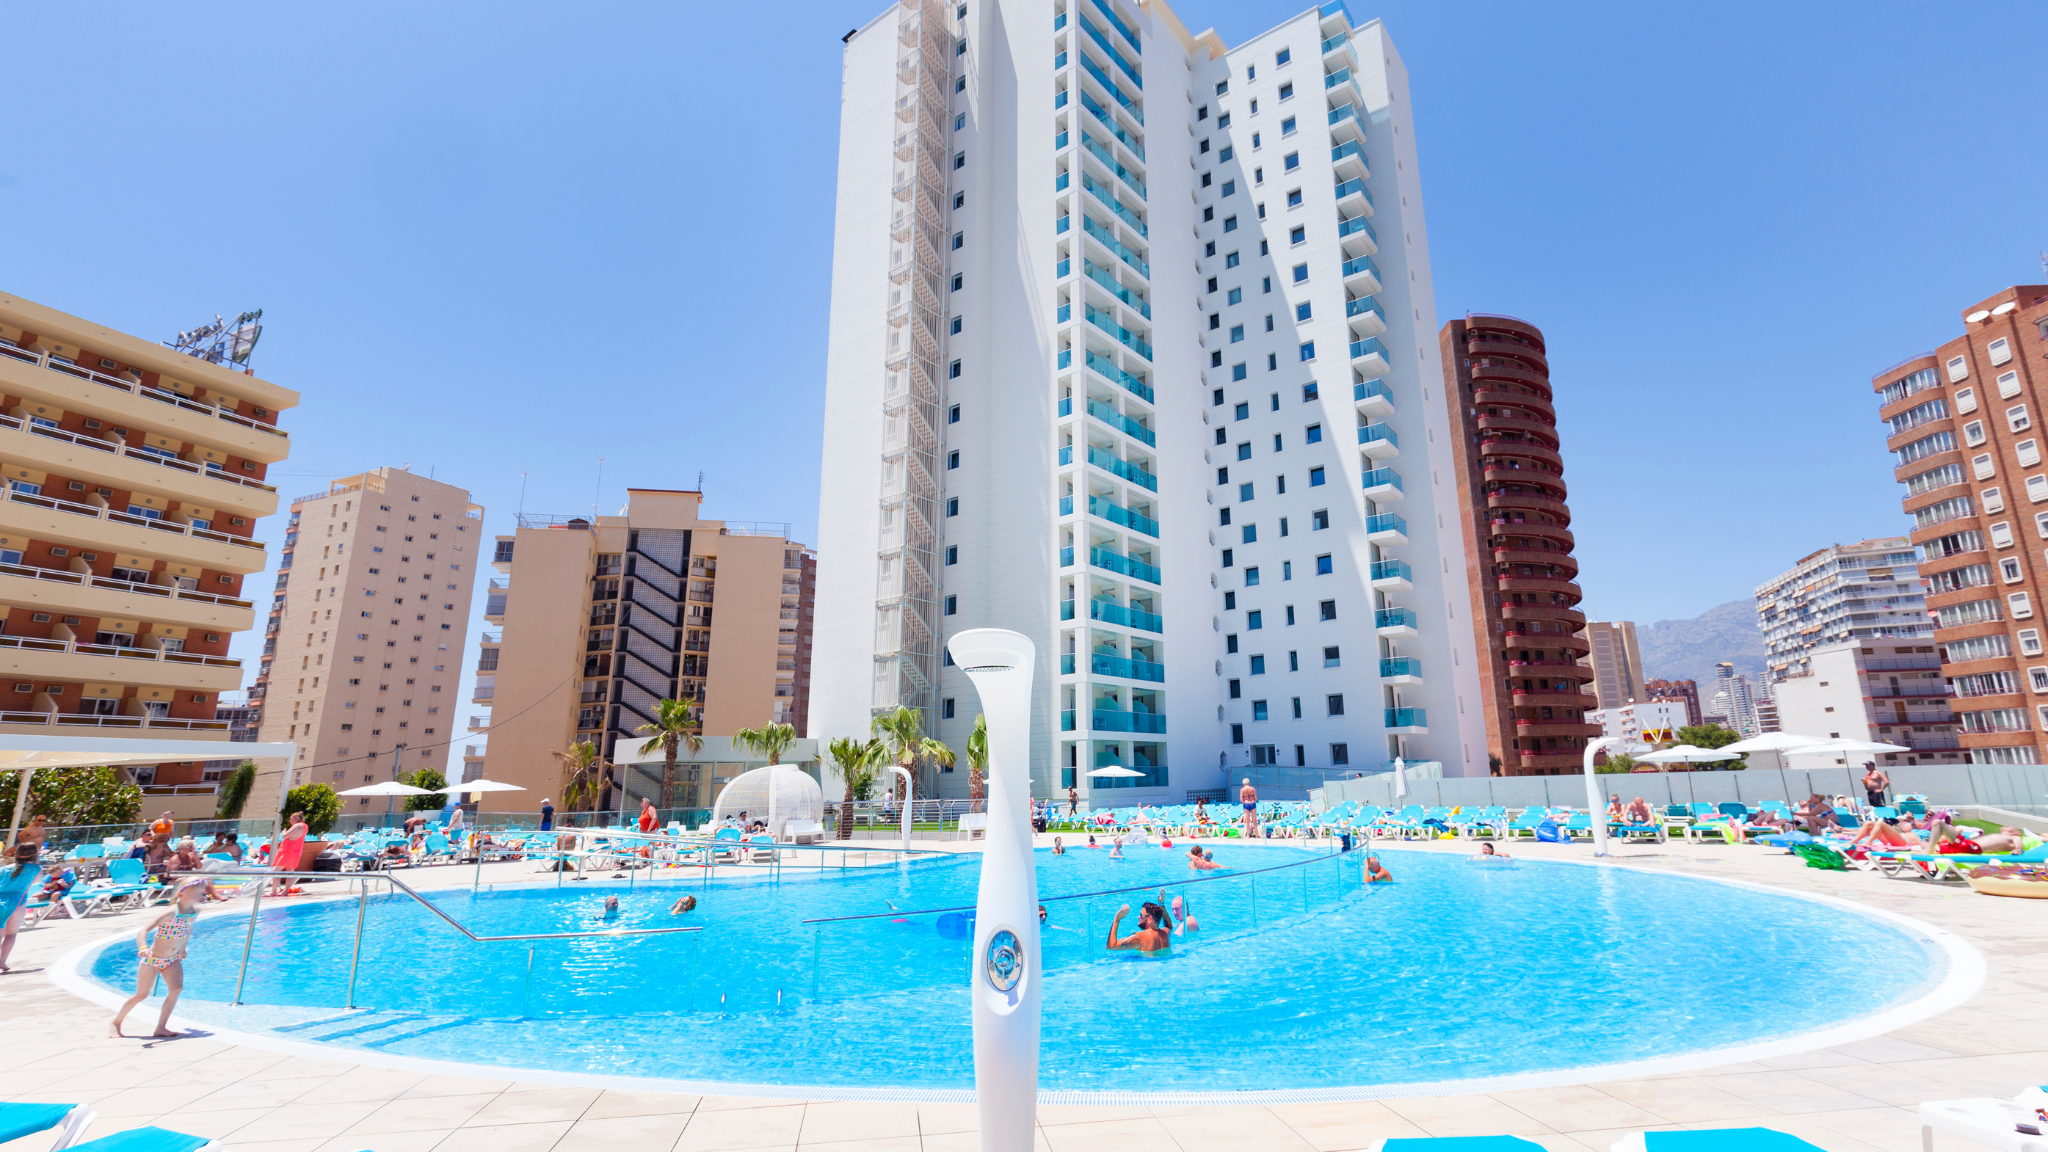 people are swimming in a large pool in front of a tall building